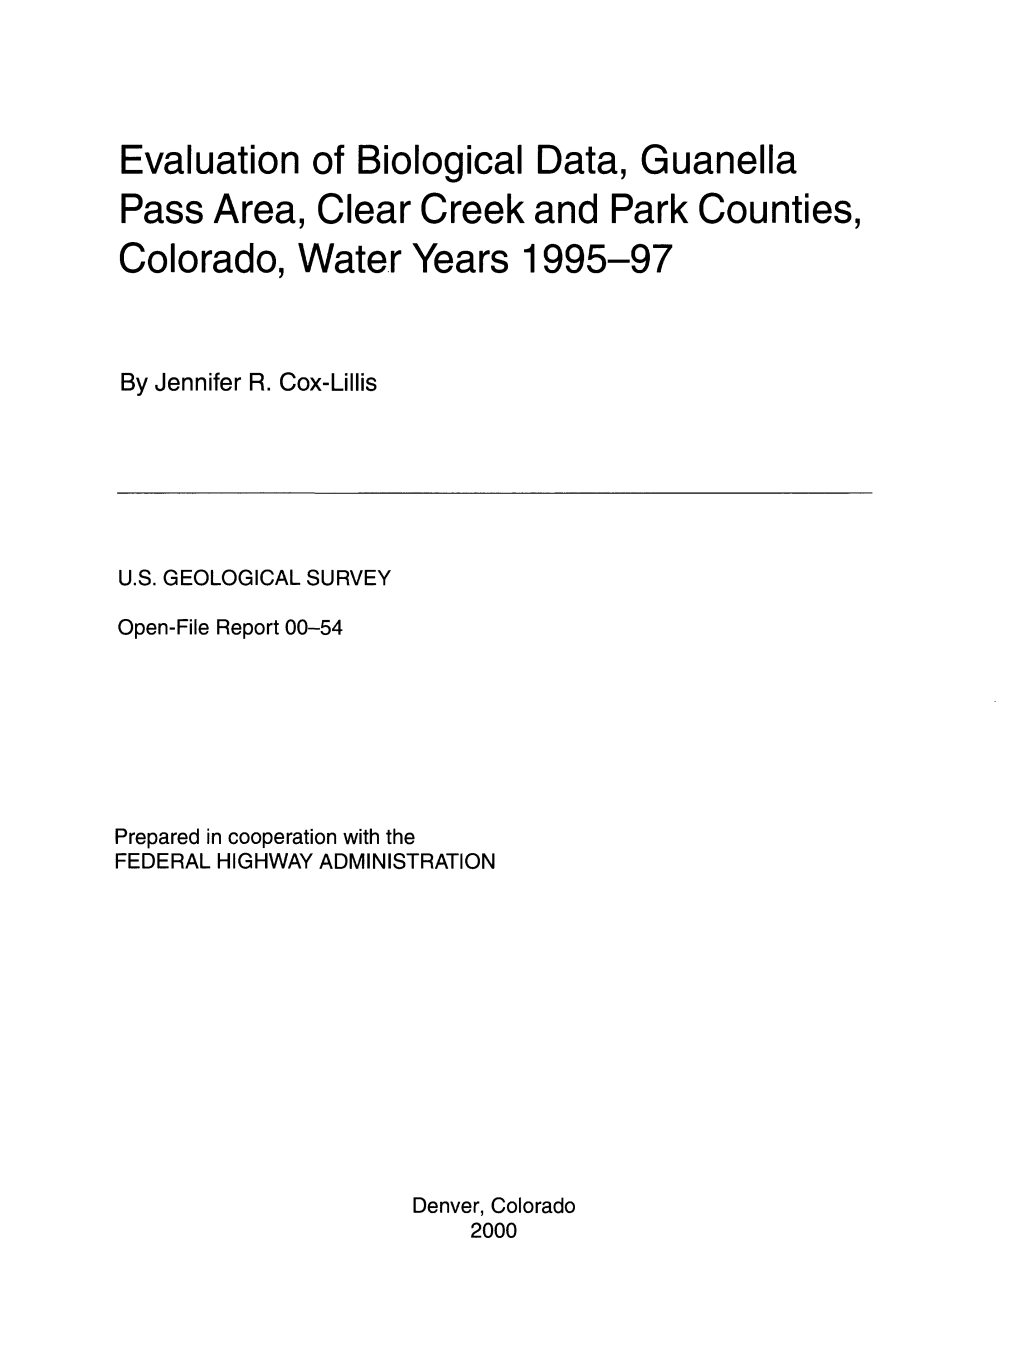 Evaluation of Biological Data, Guanella Pass Area, Clear Creek and Park Counties, Colorado, Water Years 1995-97